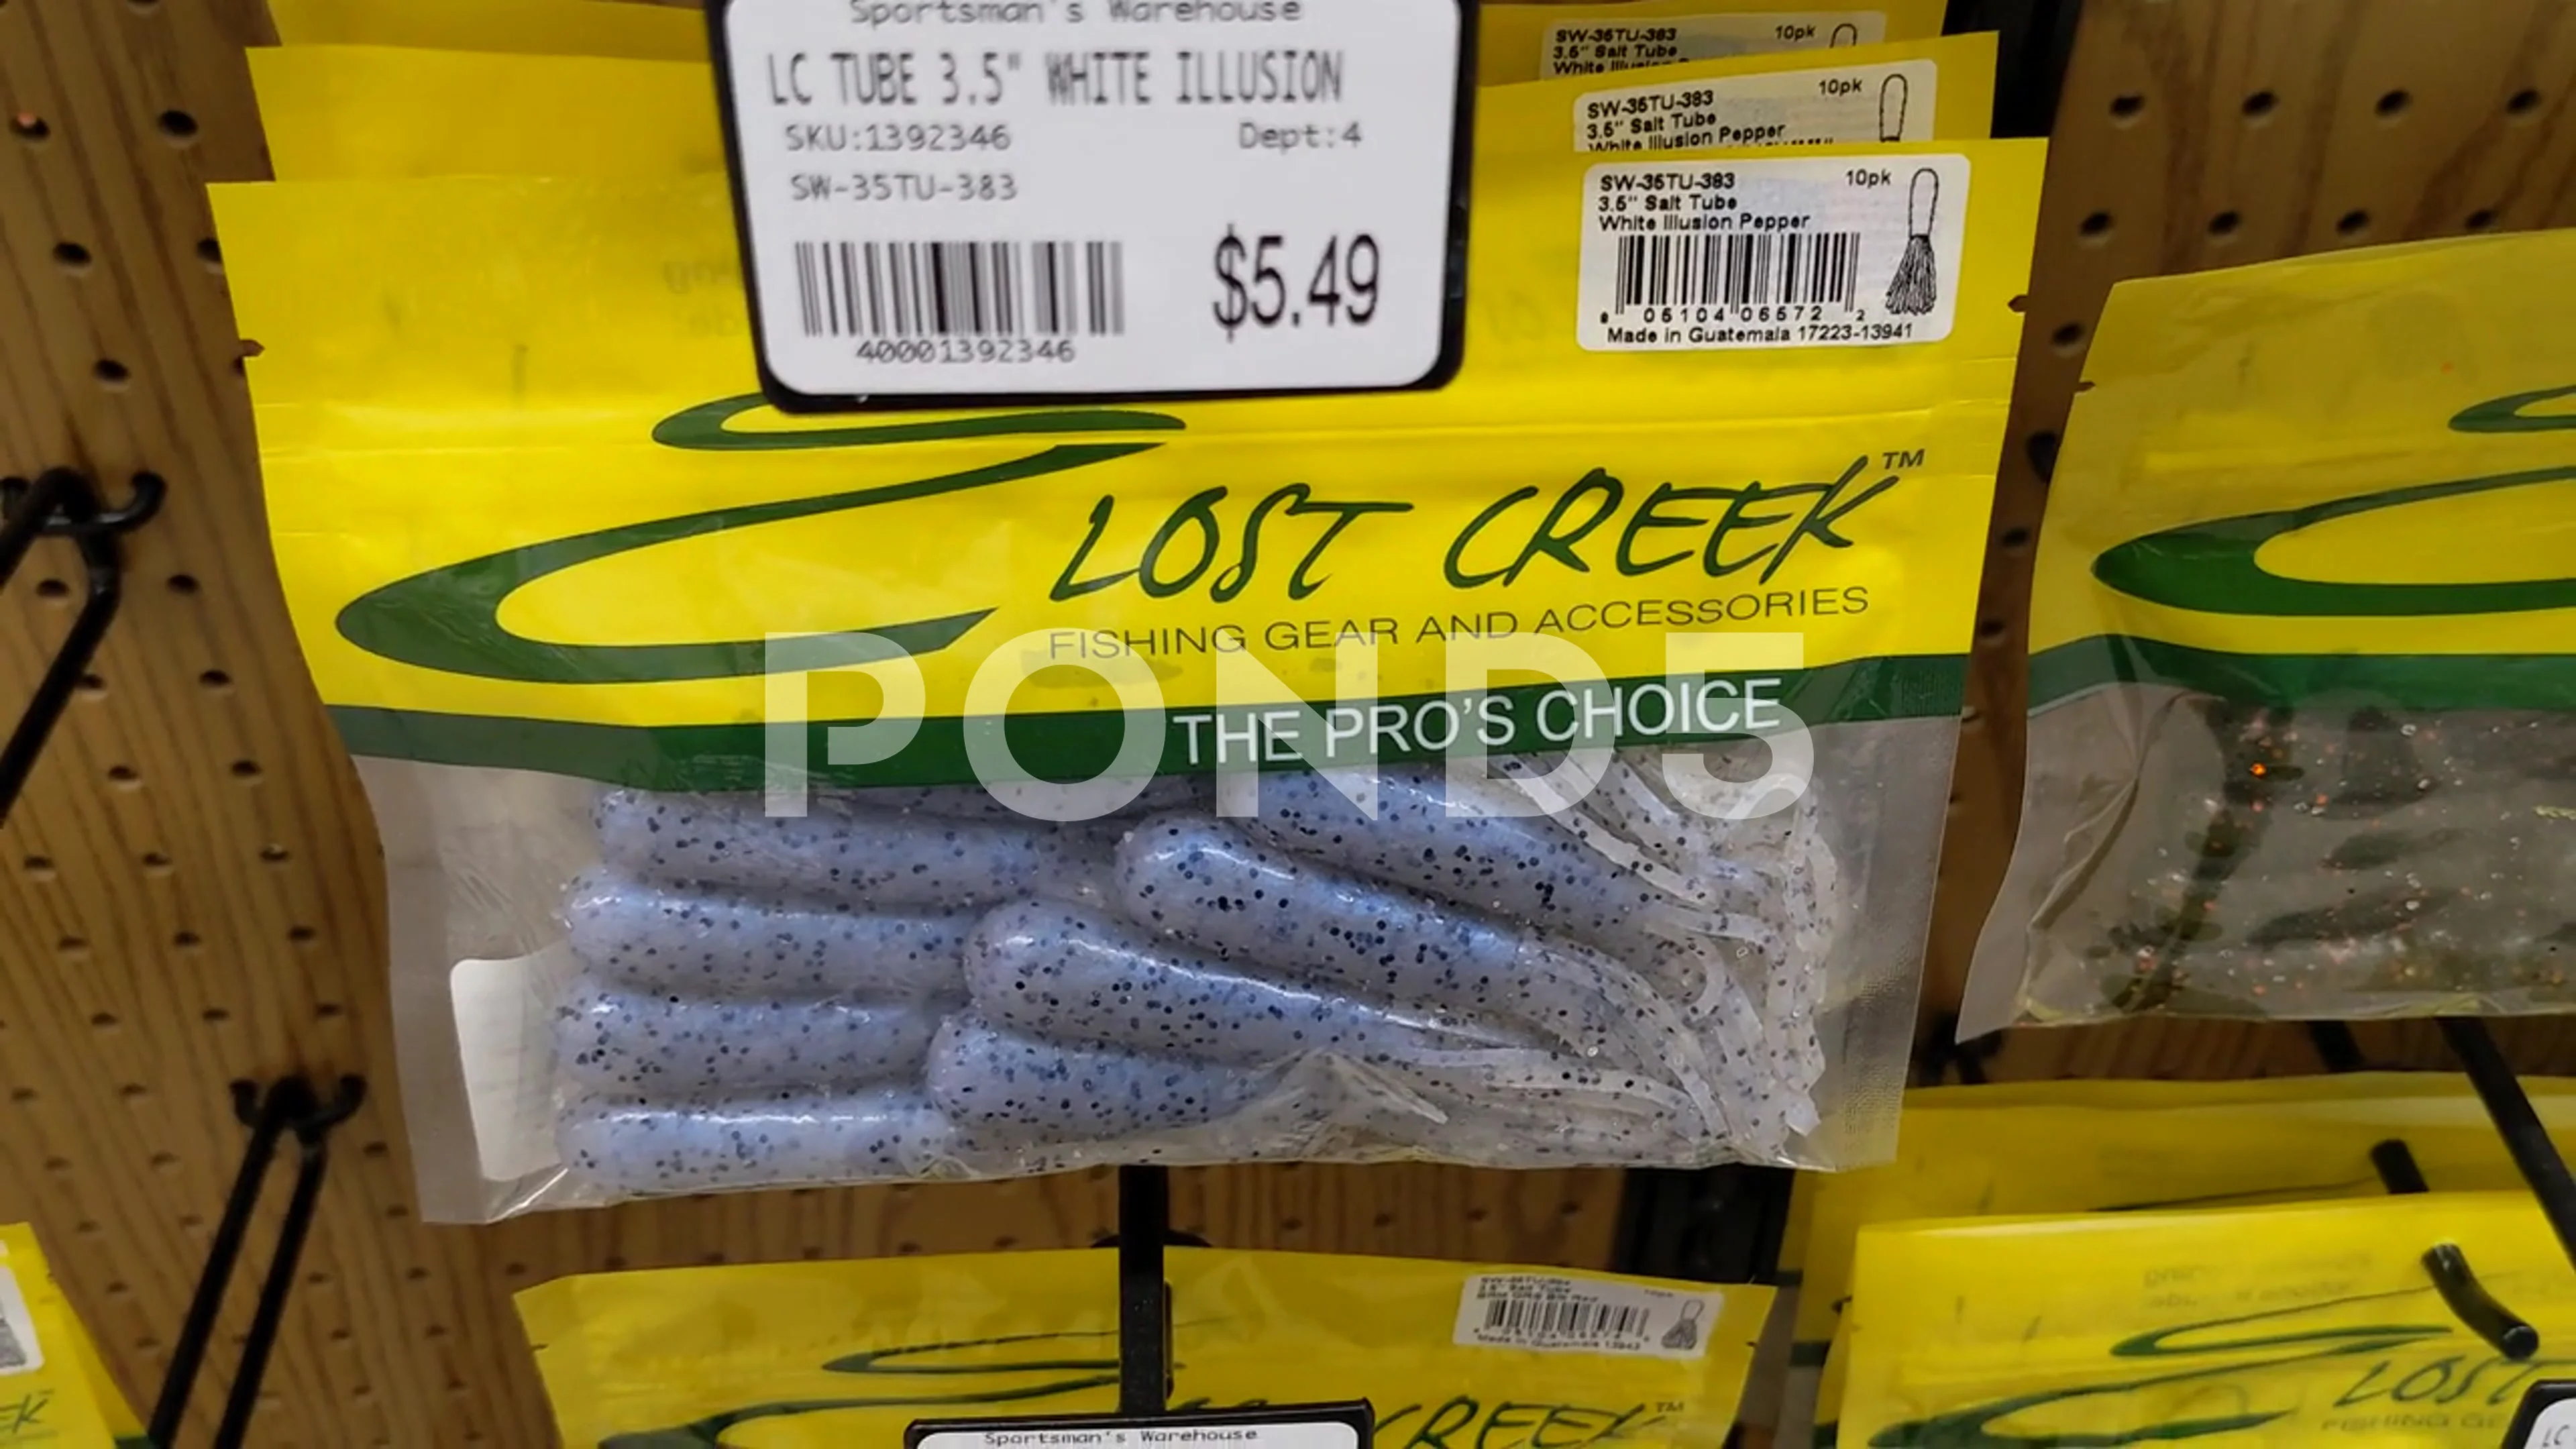 Lost Creek Pro's Choice Fishing Products, Stock Video